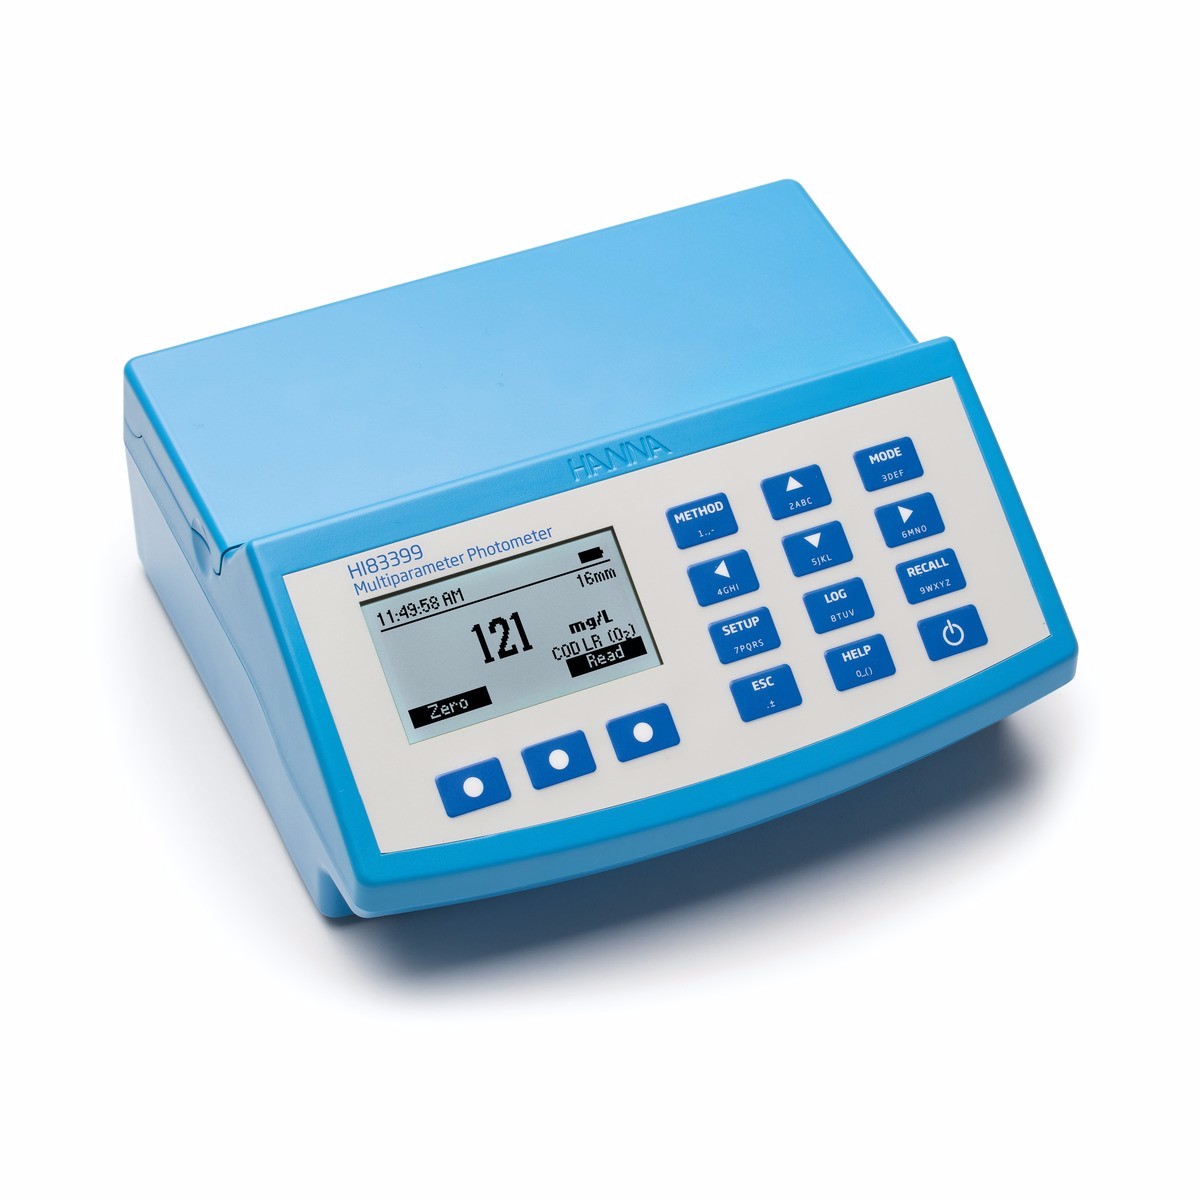 HI83399-02 Water & Wastewater Multiparameter (with COD) Photometer